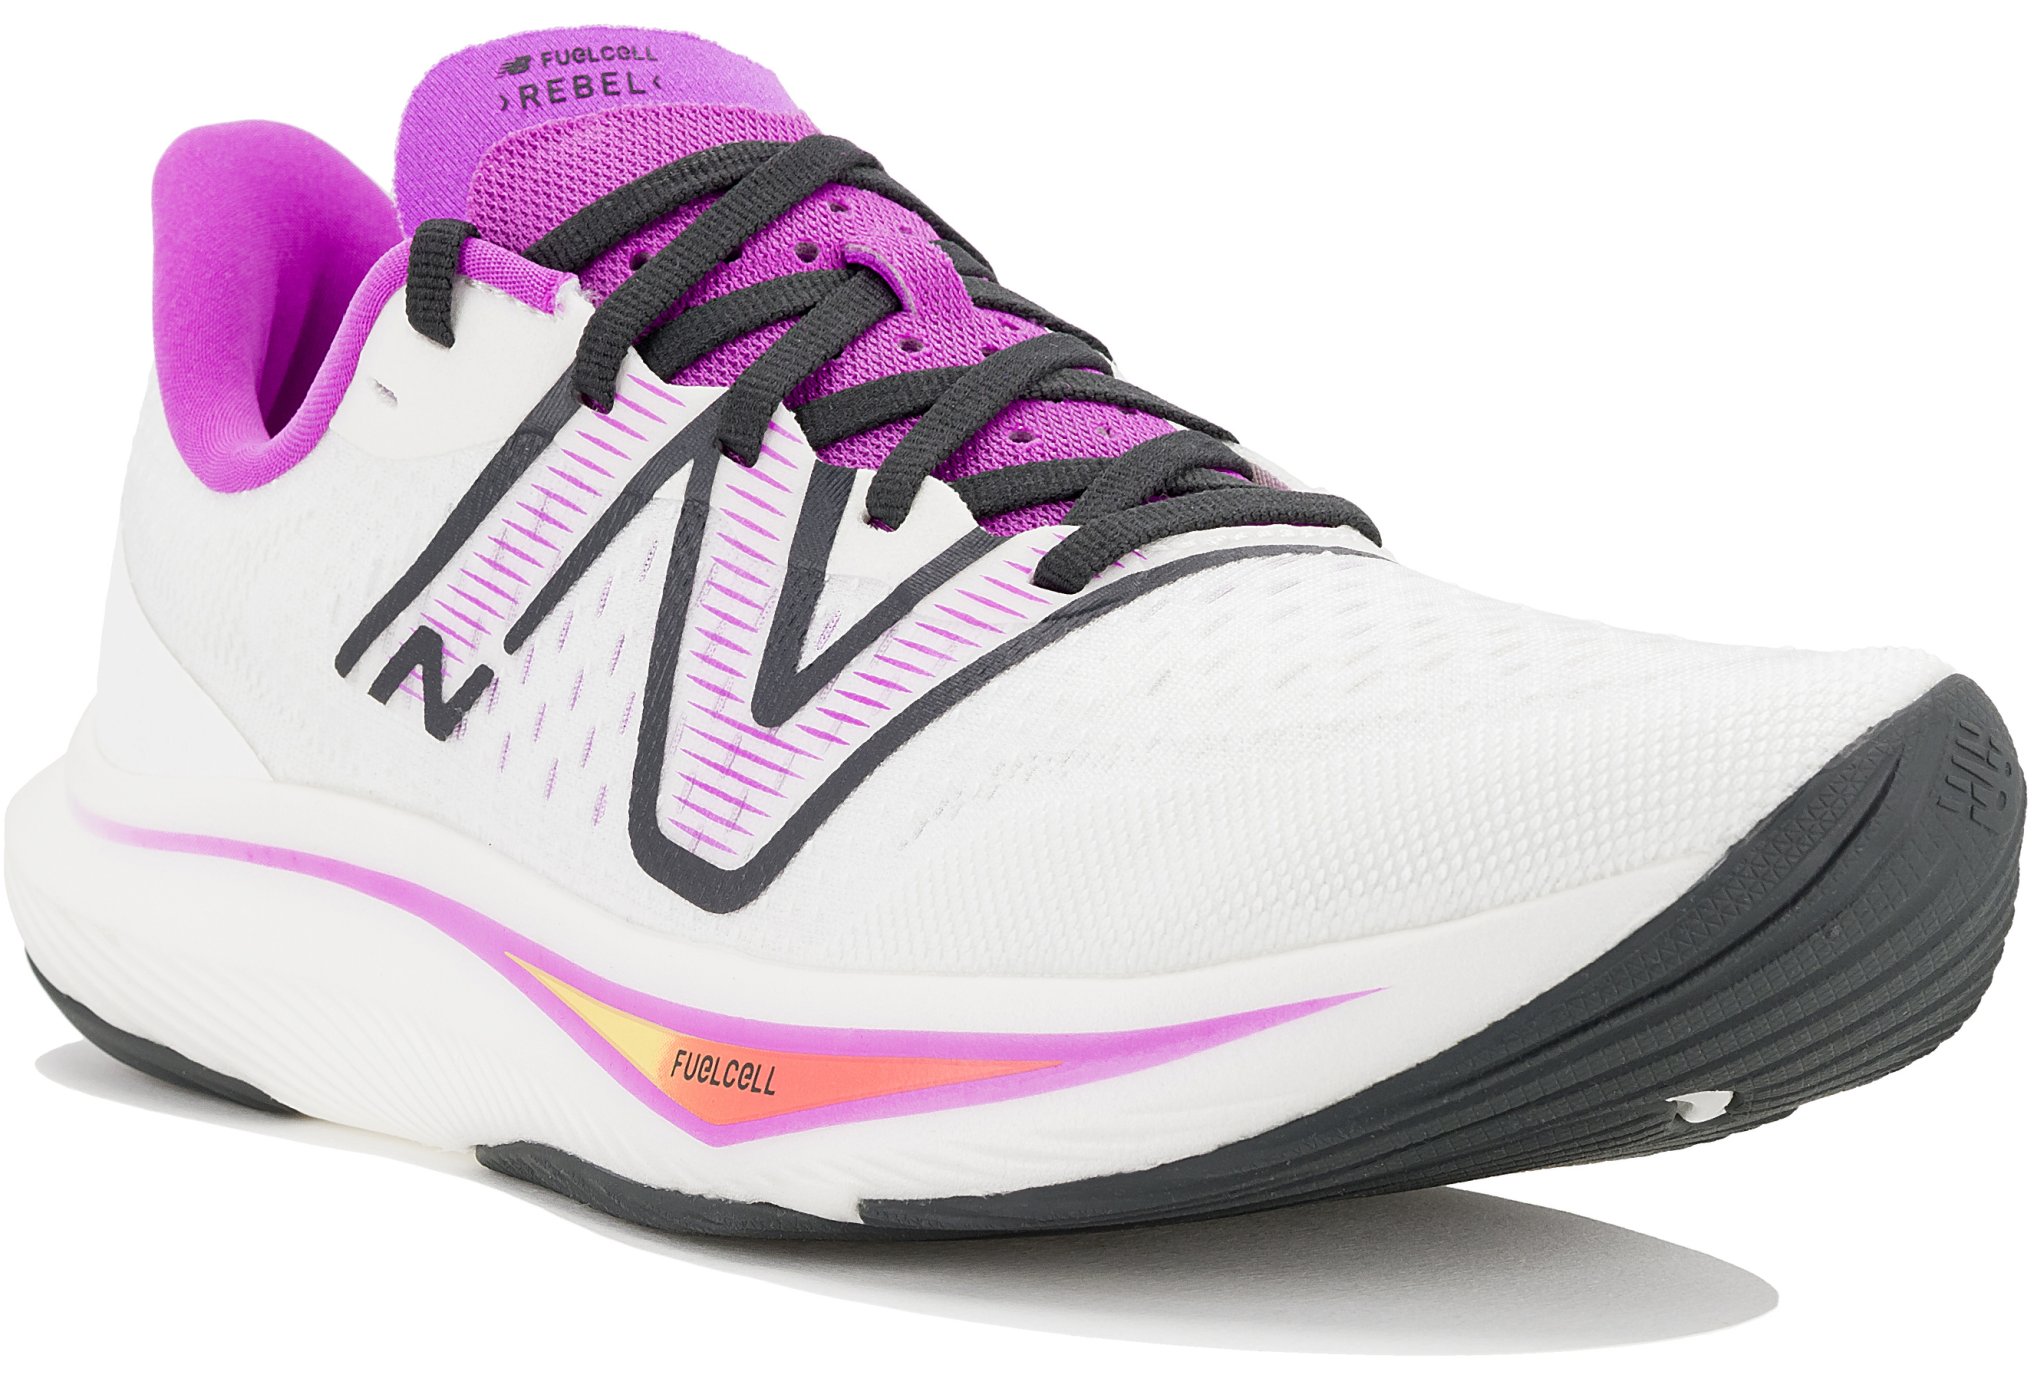 New Balance FuelCell Rebel V3 W Chaussures running femme